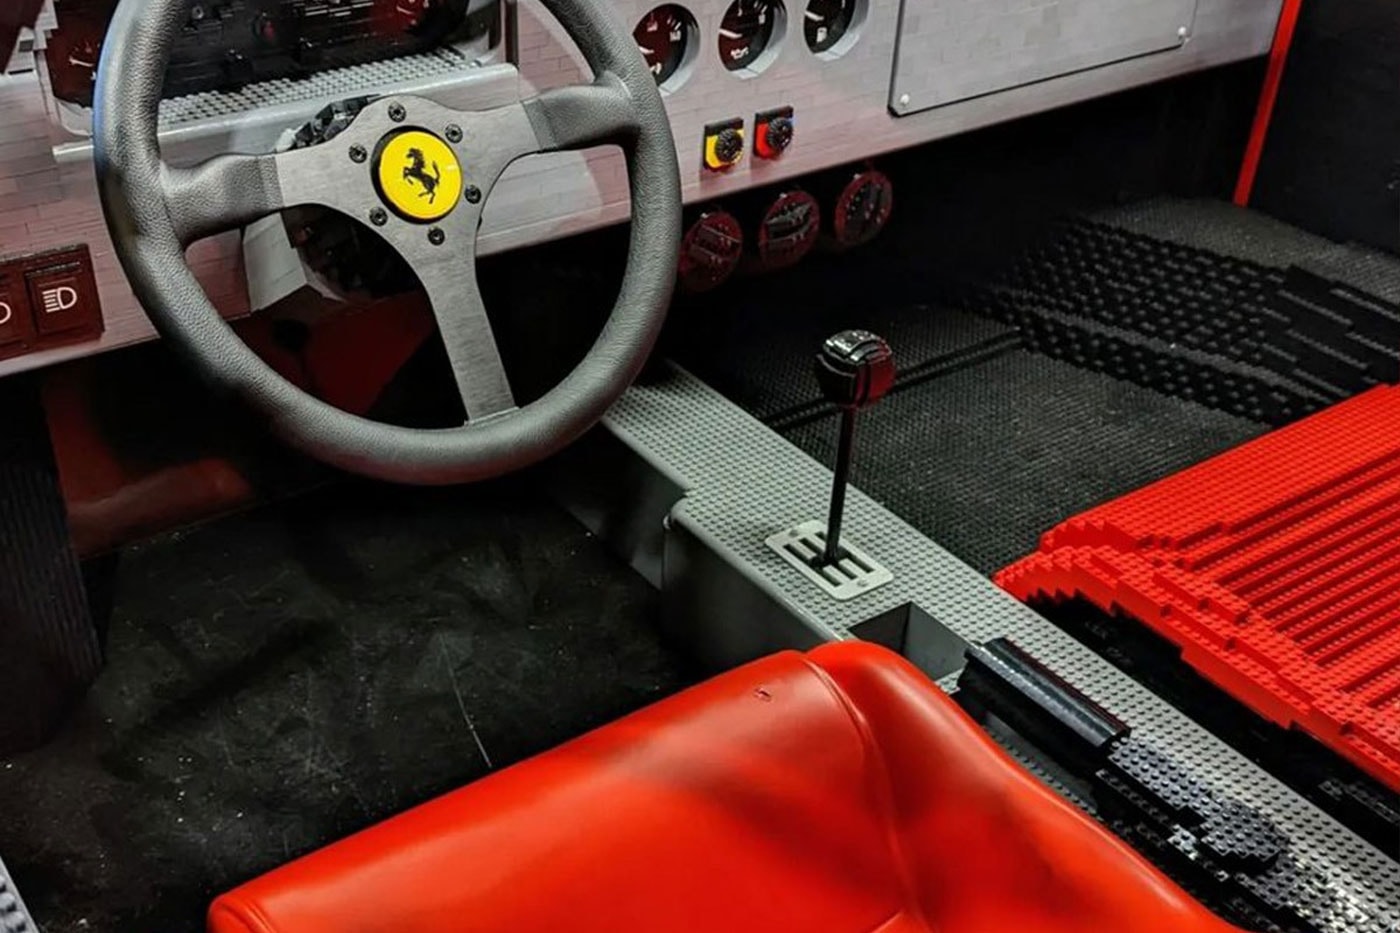 LEGO Ferrari f40 brick model 1 of 1 size legendary supercar toy version larry chen 3700 hours connected to real steering wheel  legoland campus california 